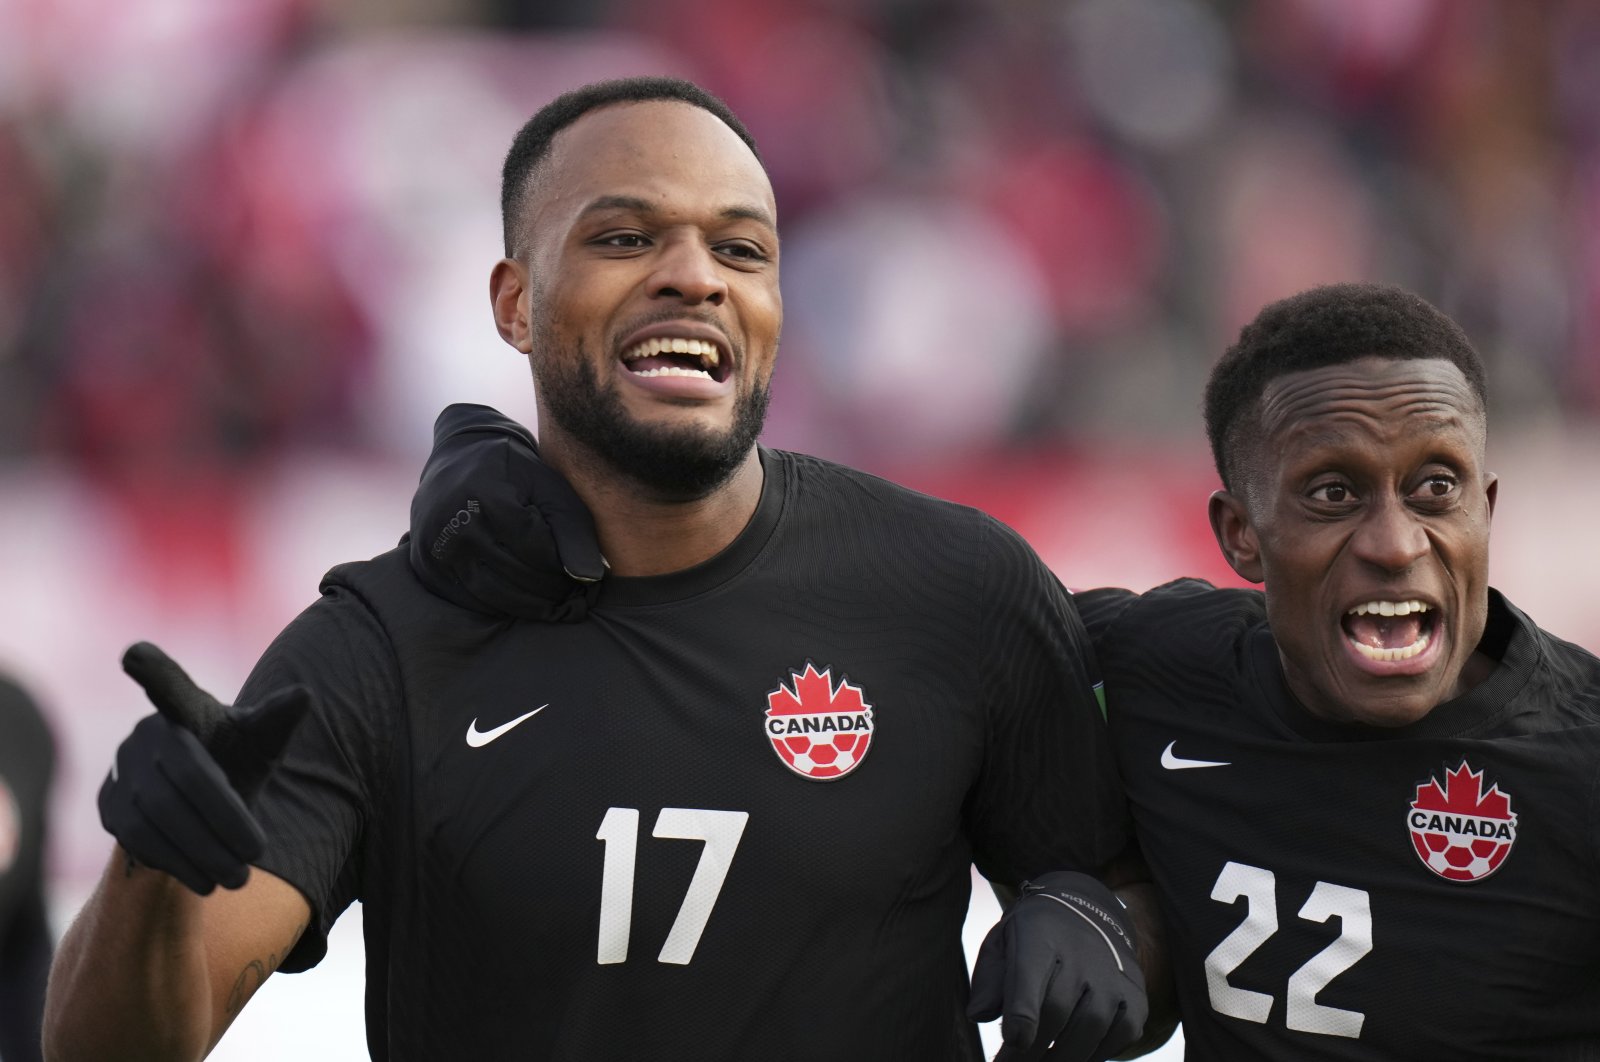 Beşiktaş&#039;s Canadian forward Cyle Larin (L) celebrates with teammate Richie Laryea after scoring goal against the U.S. in a World Cup qualifier, Hamilton, Ontario, Canada, Jan. 30, 2022. (AP Photo)